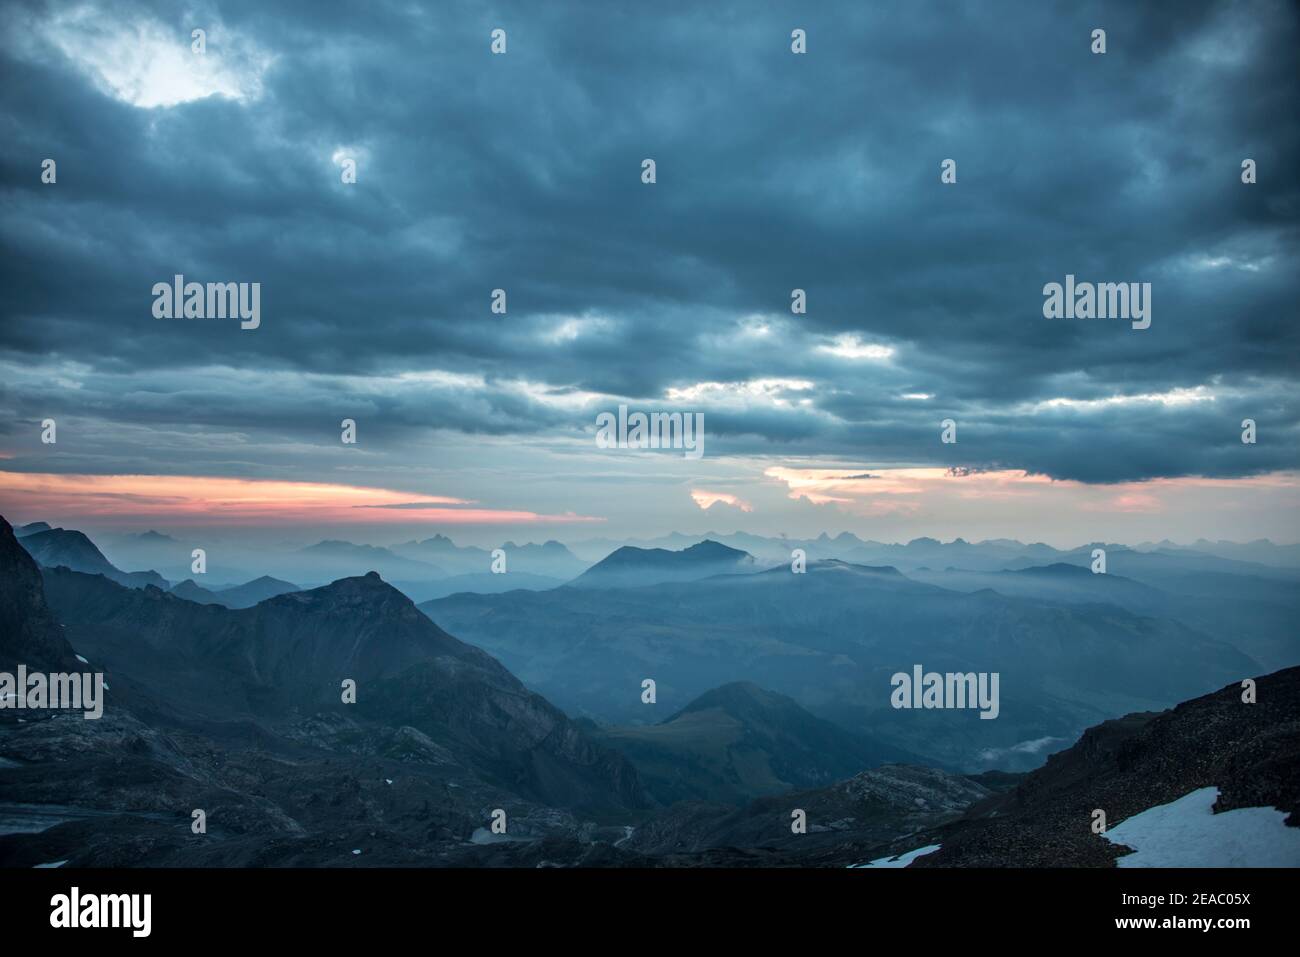 Dusk in the high mountains with an overcast sky Stock Photo